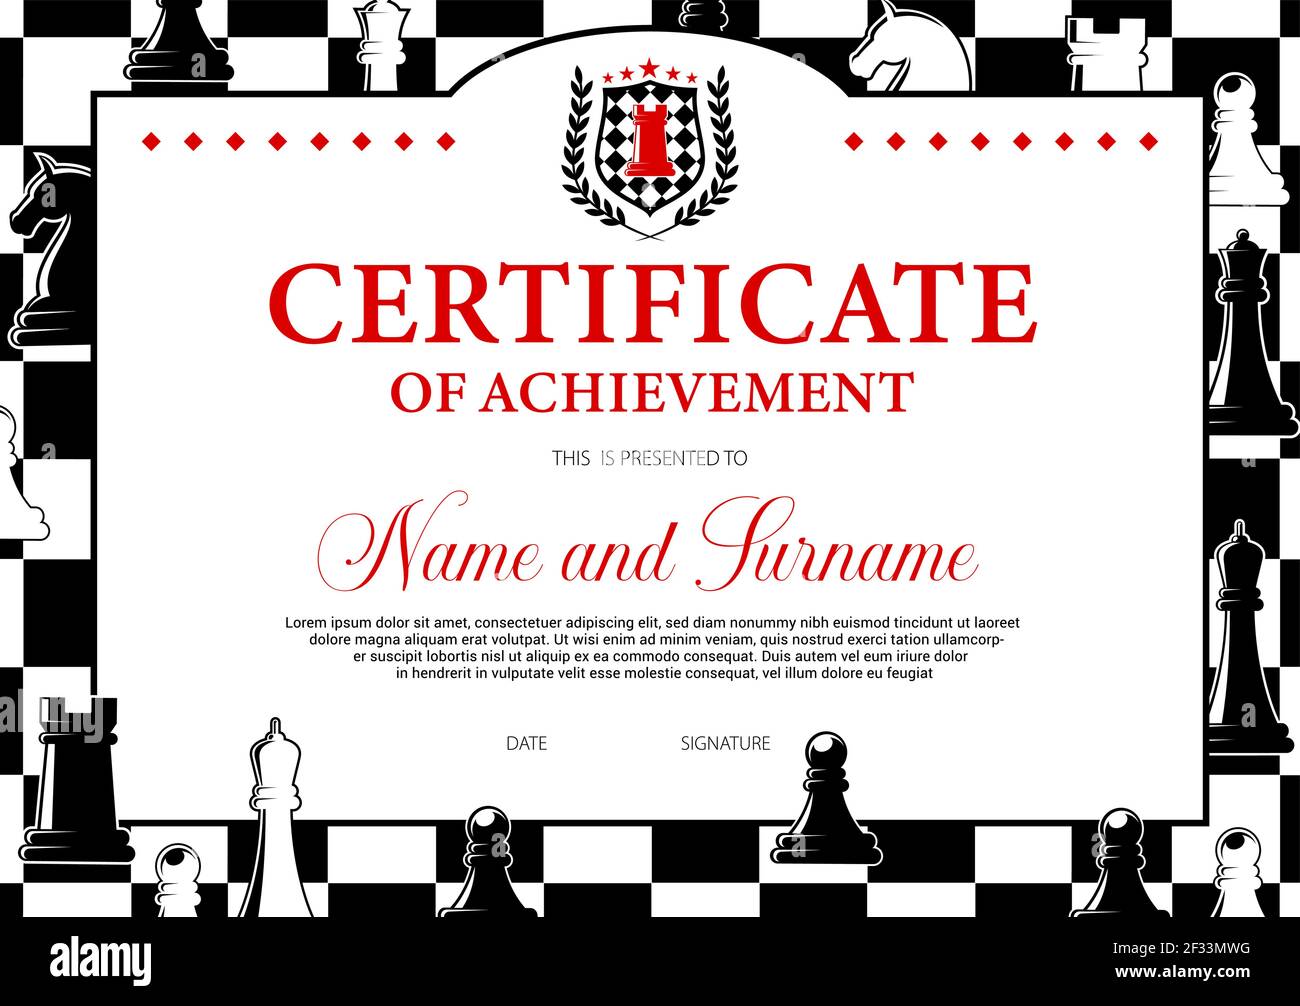 Certificate of achievement in chess tournament participation award